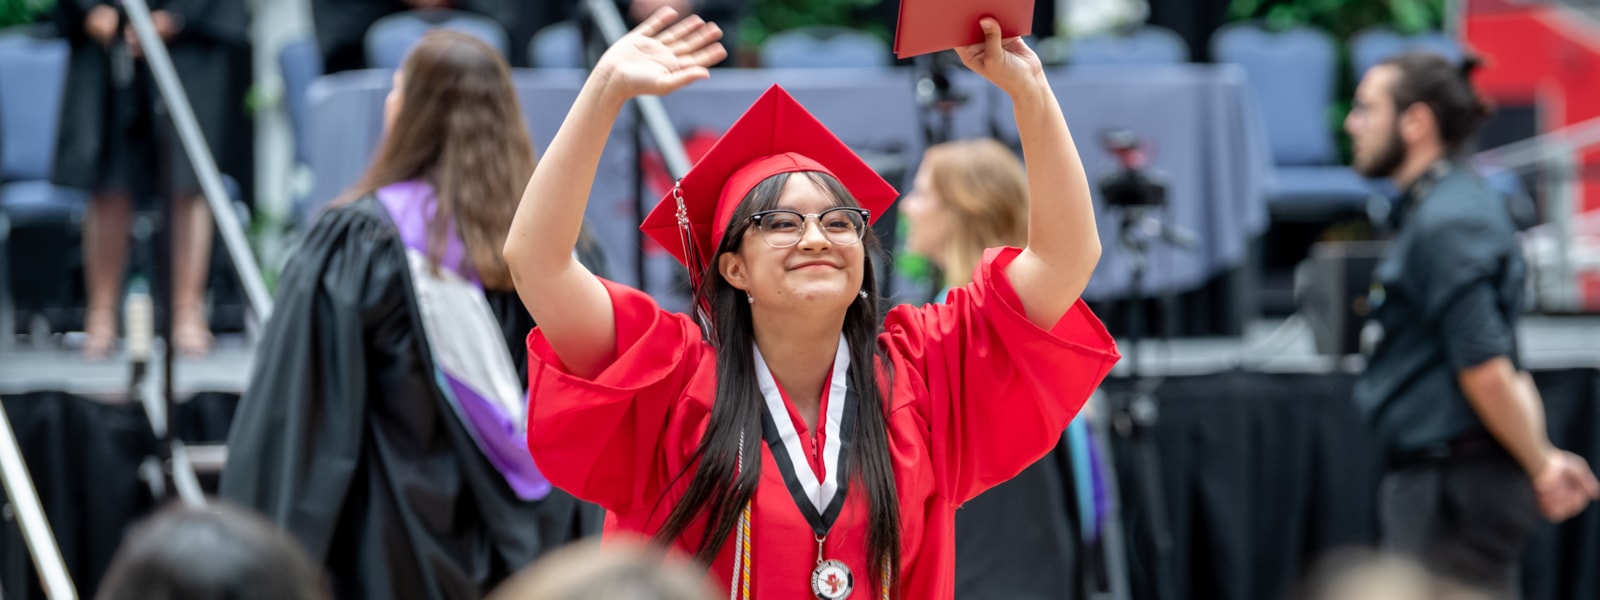 A Dysart Senior at graduation holding her diploma up, walking back to her seat. 